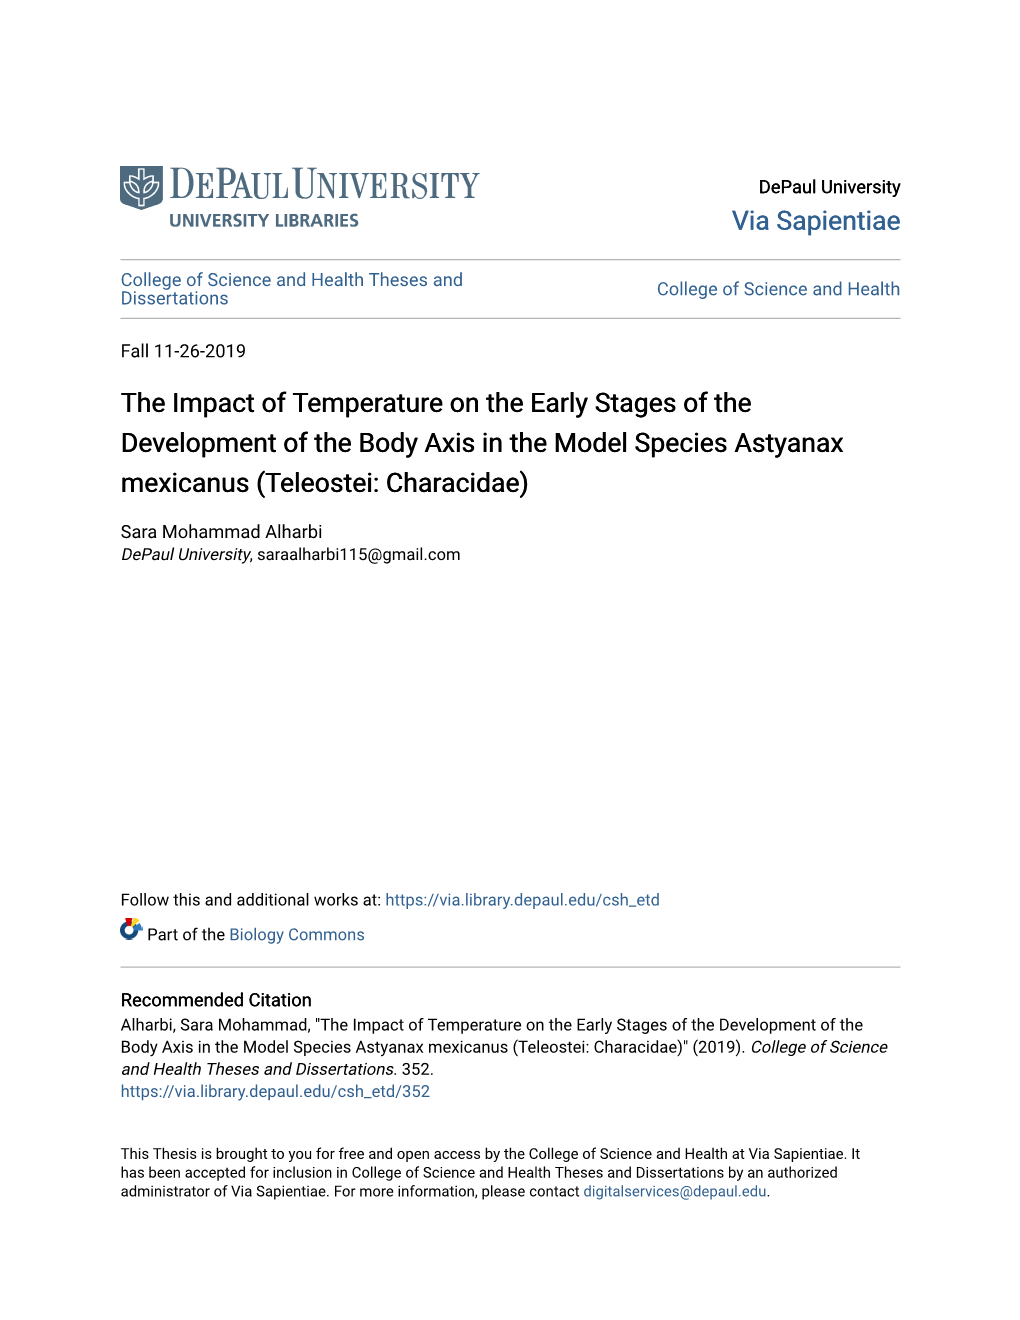 The Impact of Temperature on the Early Stages of the Development of the Body Axis in the Model Species Astyanax Mexicanus (Teleostei: Characidae)